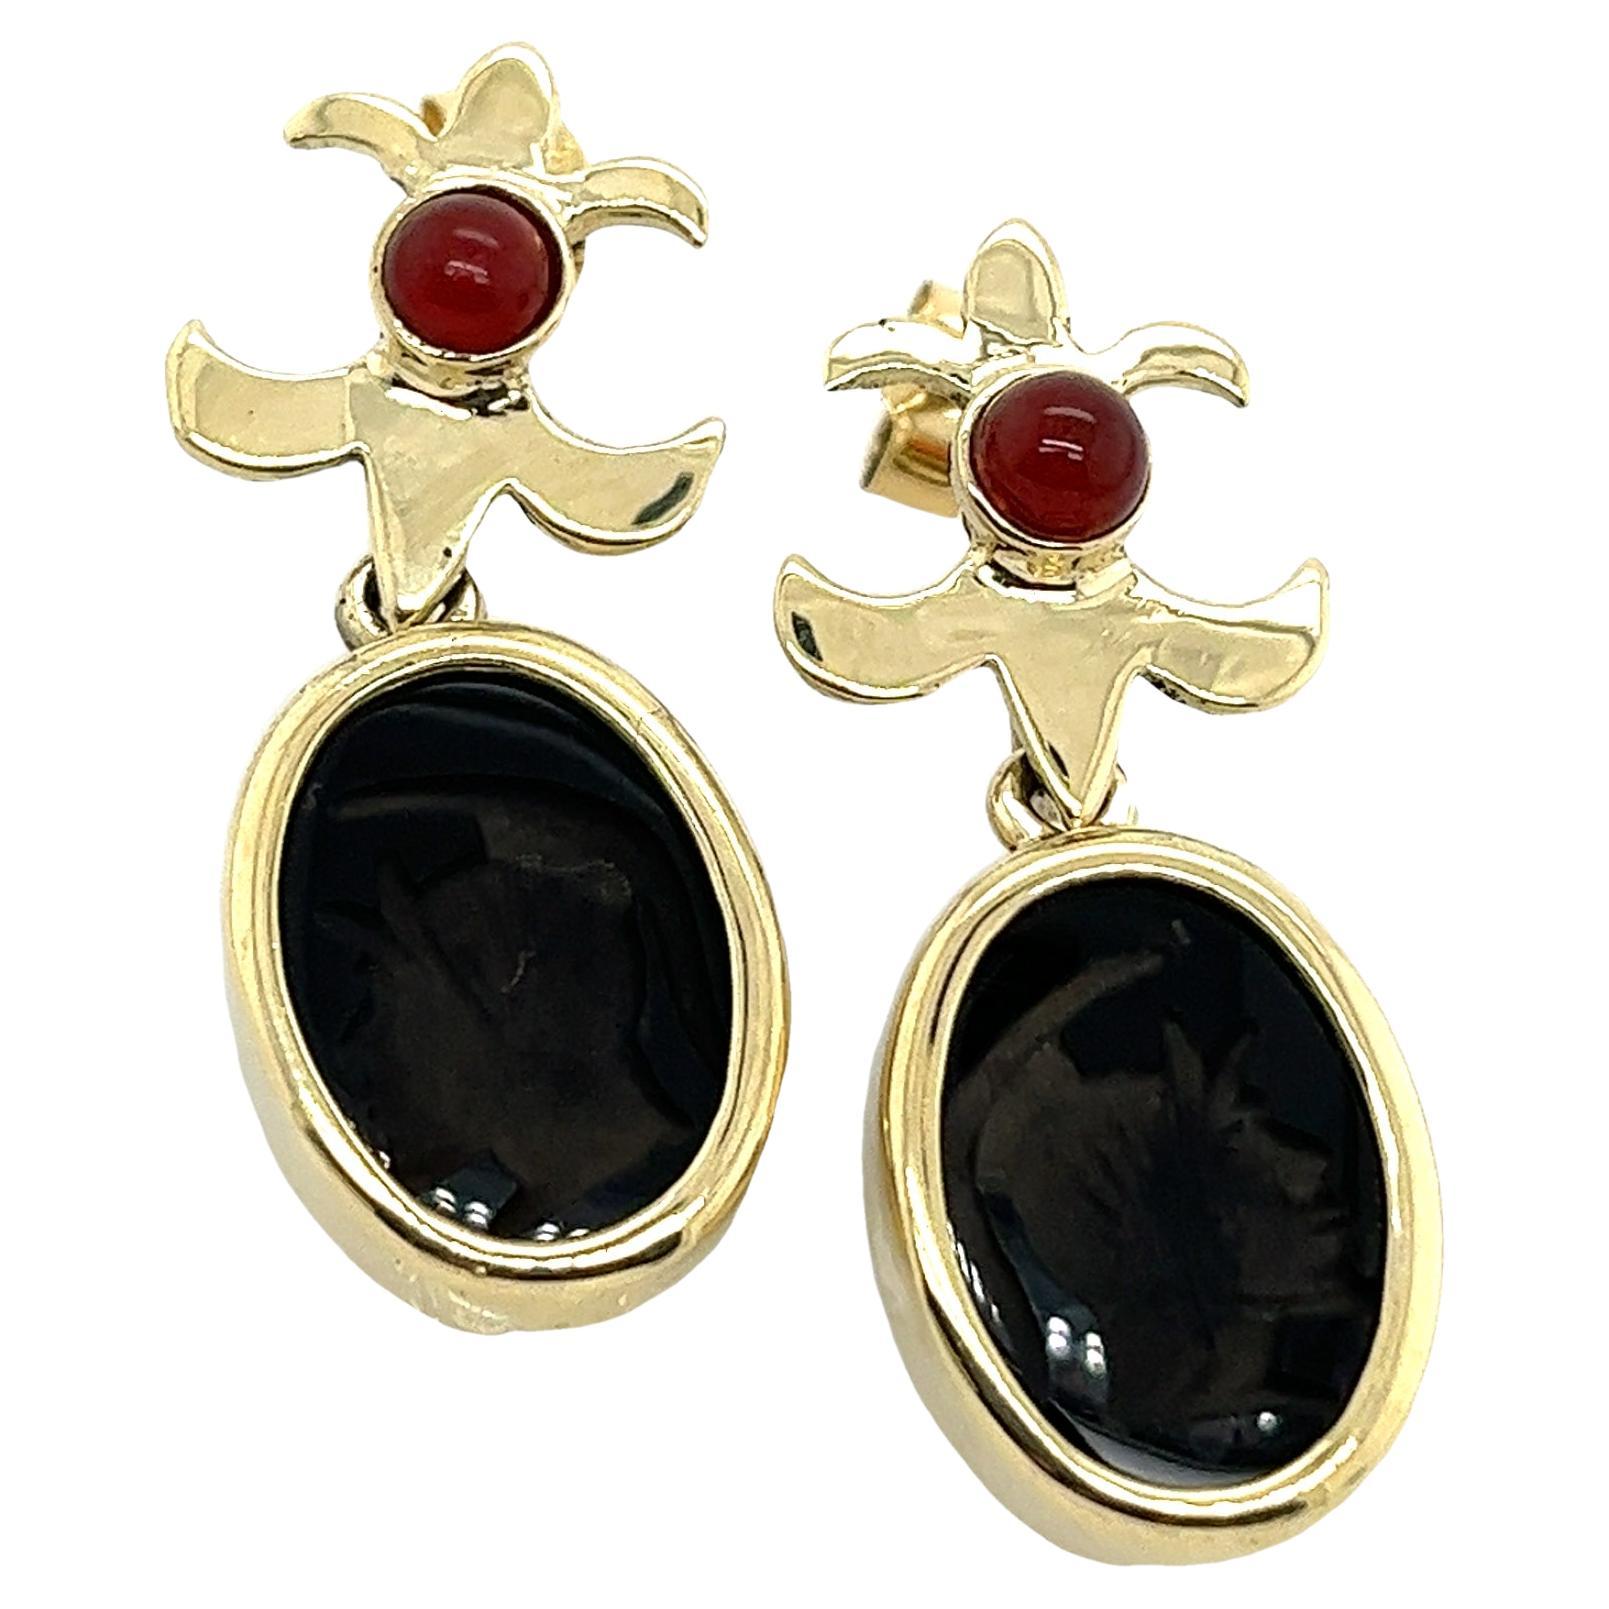 14ct Yellow Gold Drop Earrings Set With 2 Hematite Carved Onyx & 2 Garnets For Sale